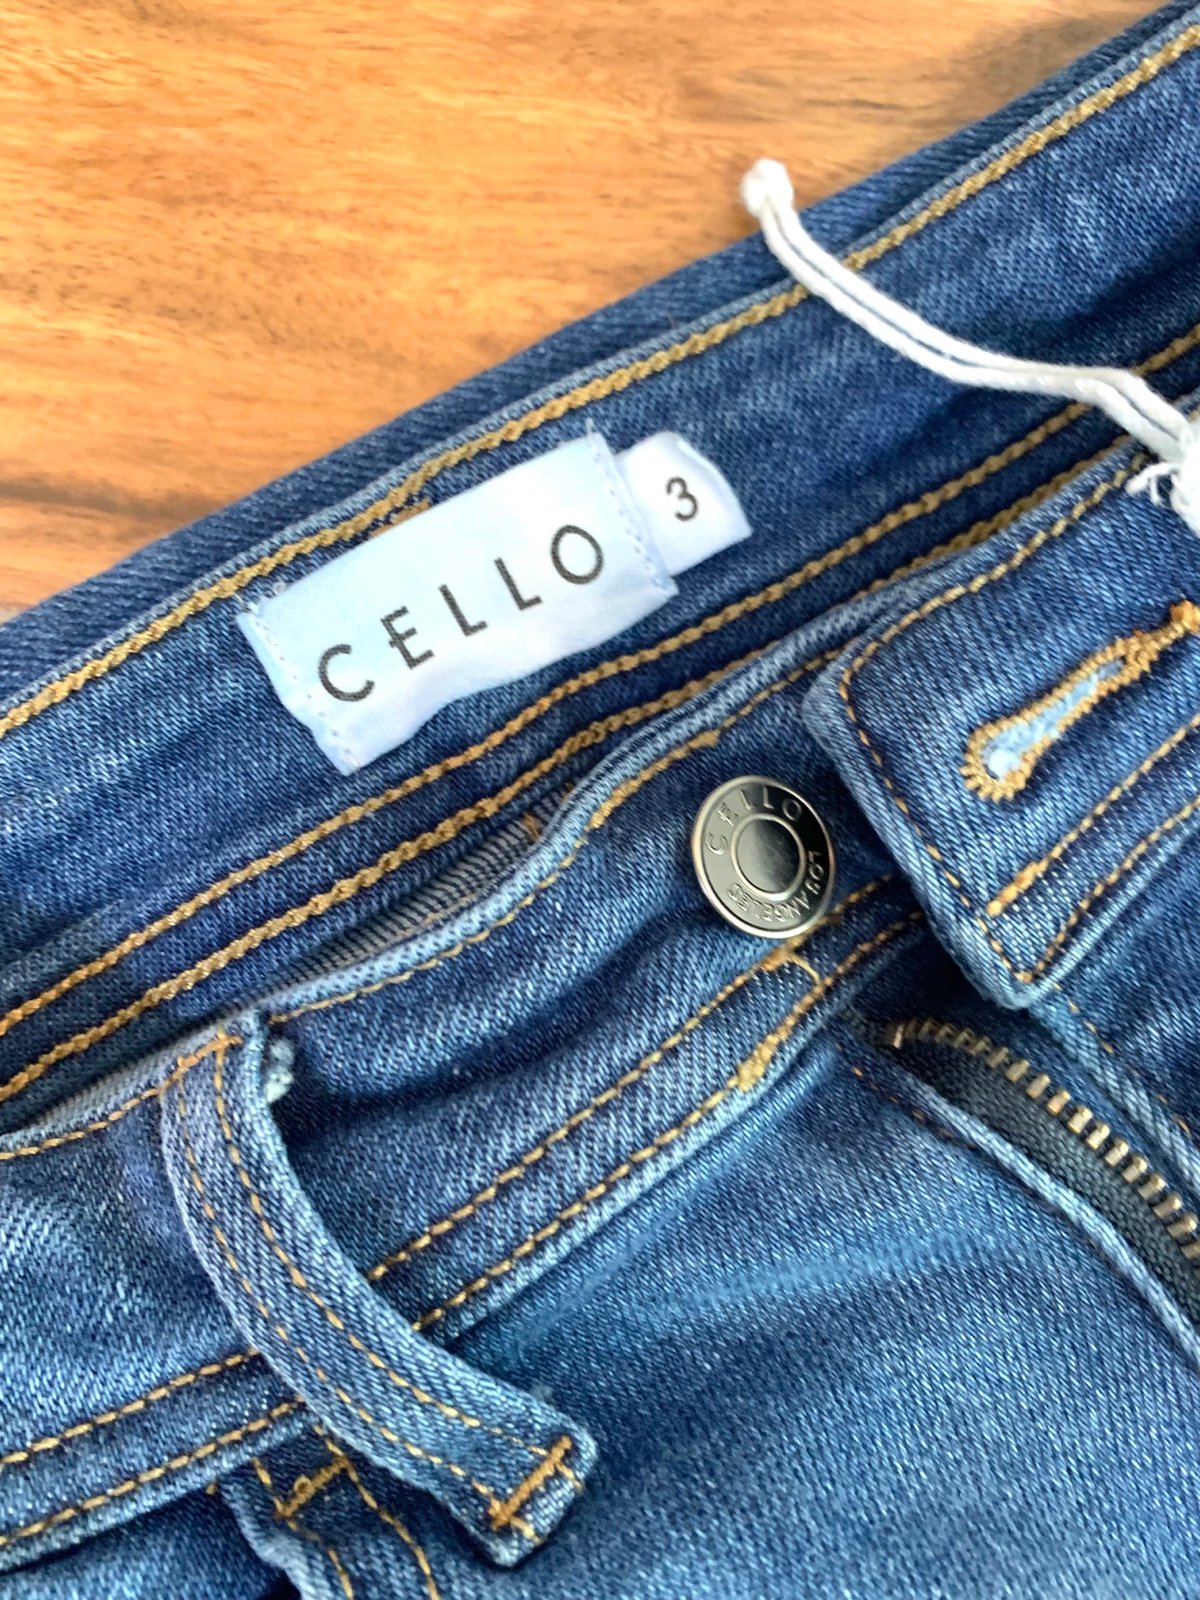 large selection Cello jeans flare HupFKW7sL Cool